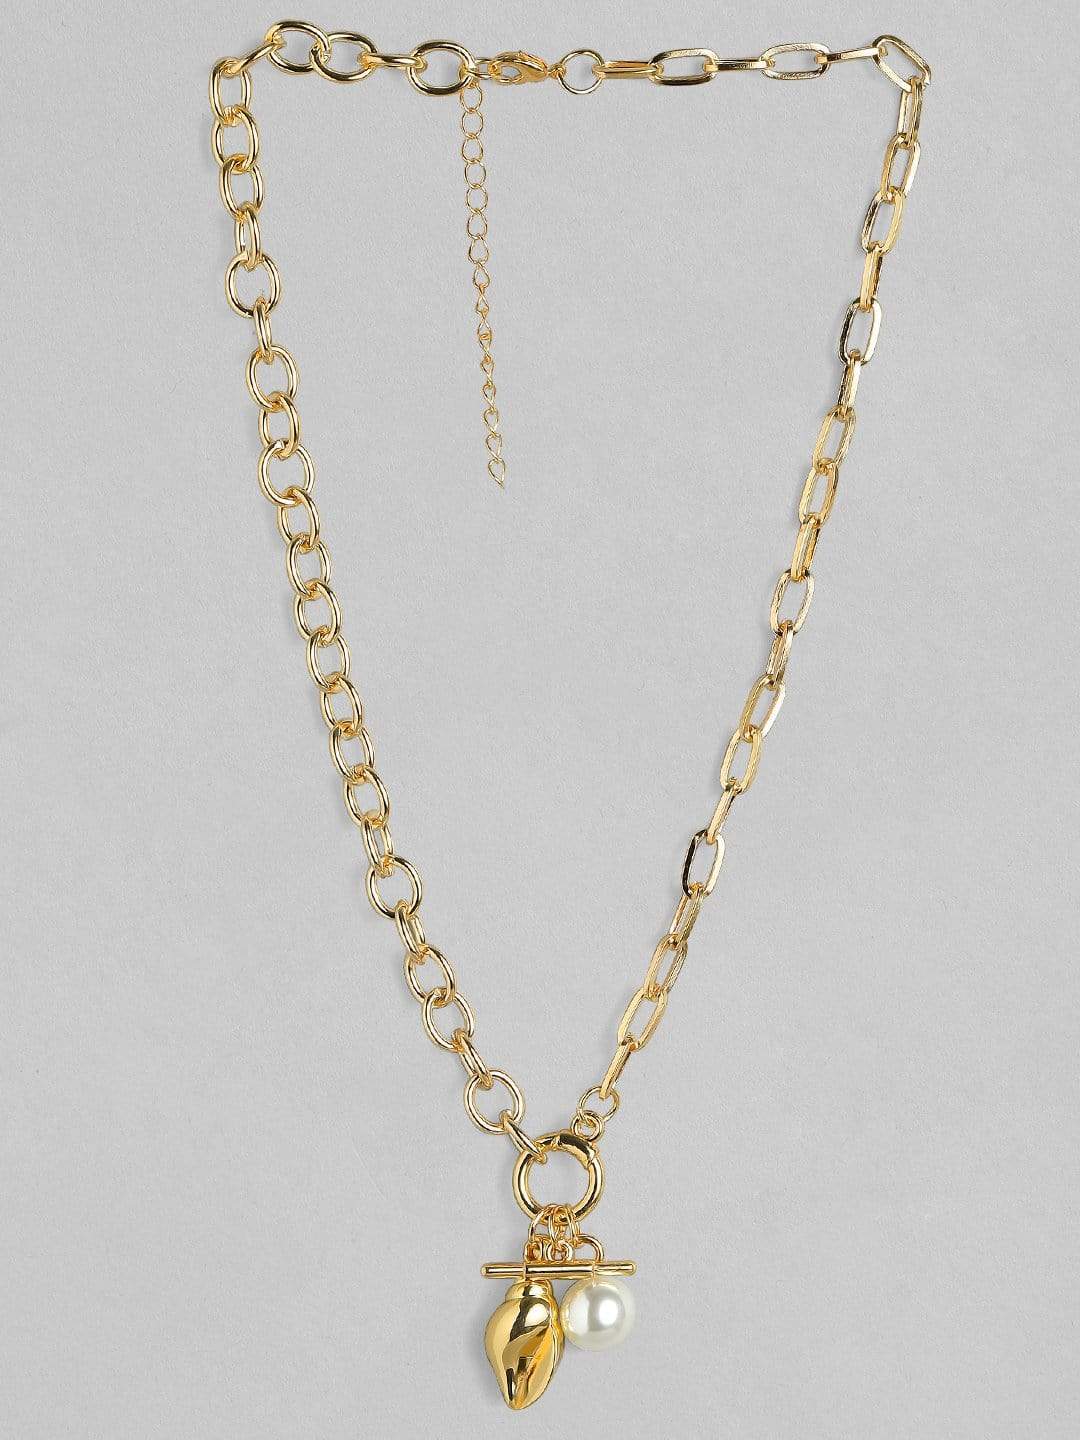 Rubans Gold Plated Handcrafted Shunk Interlinked Chain Necklace Chain & Necklaces